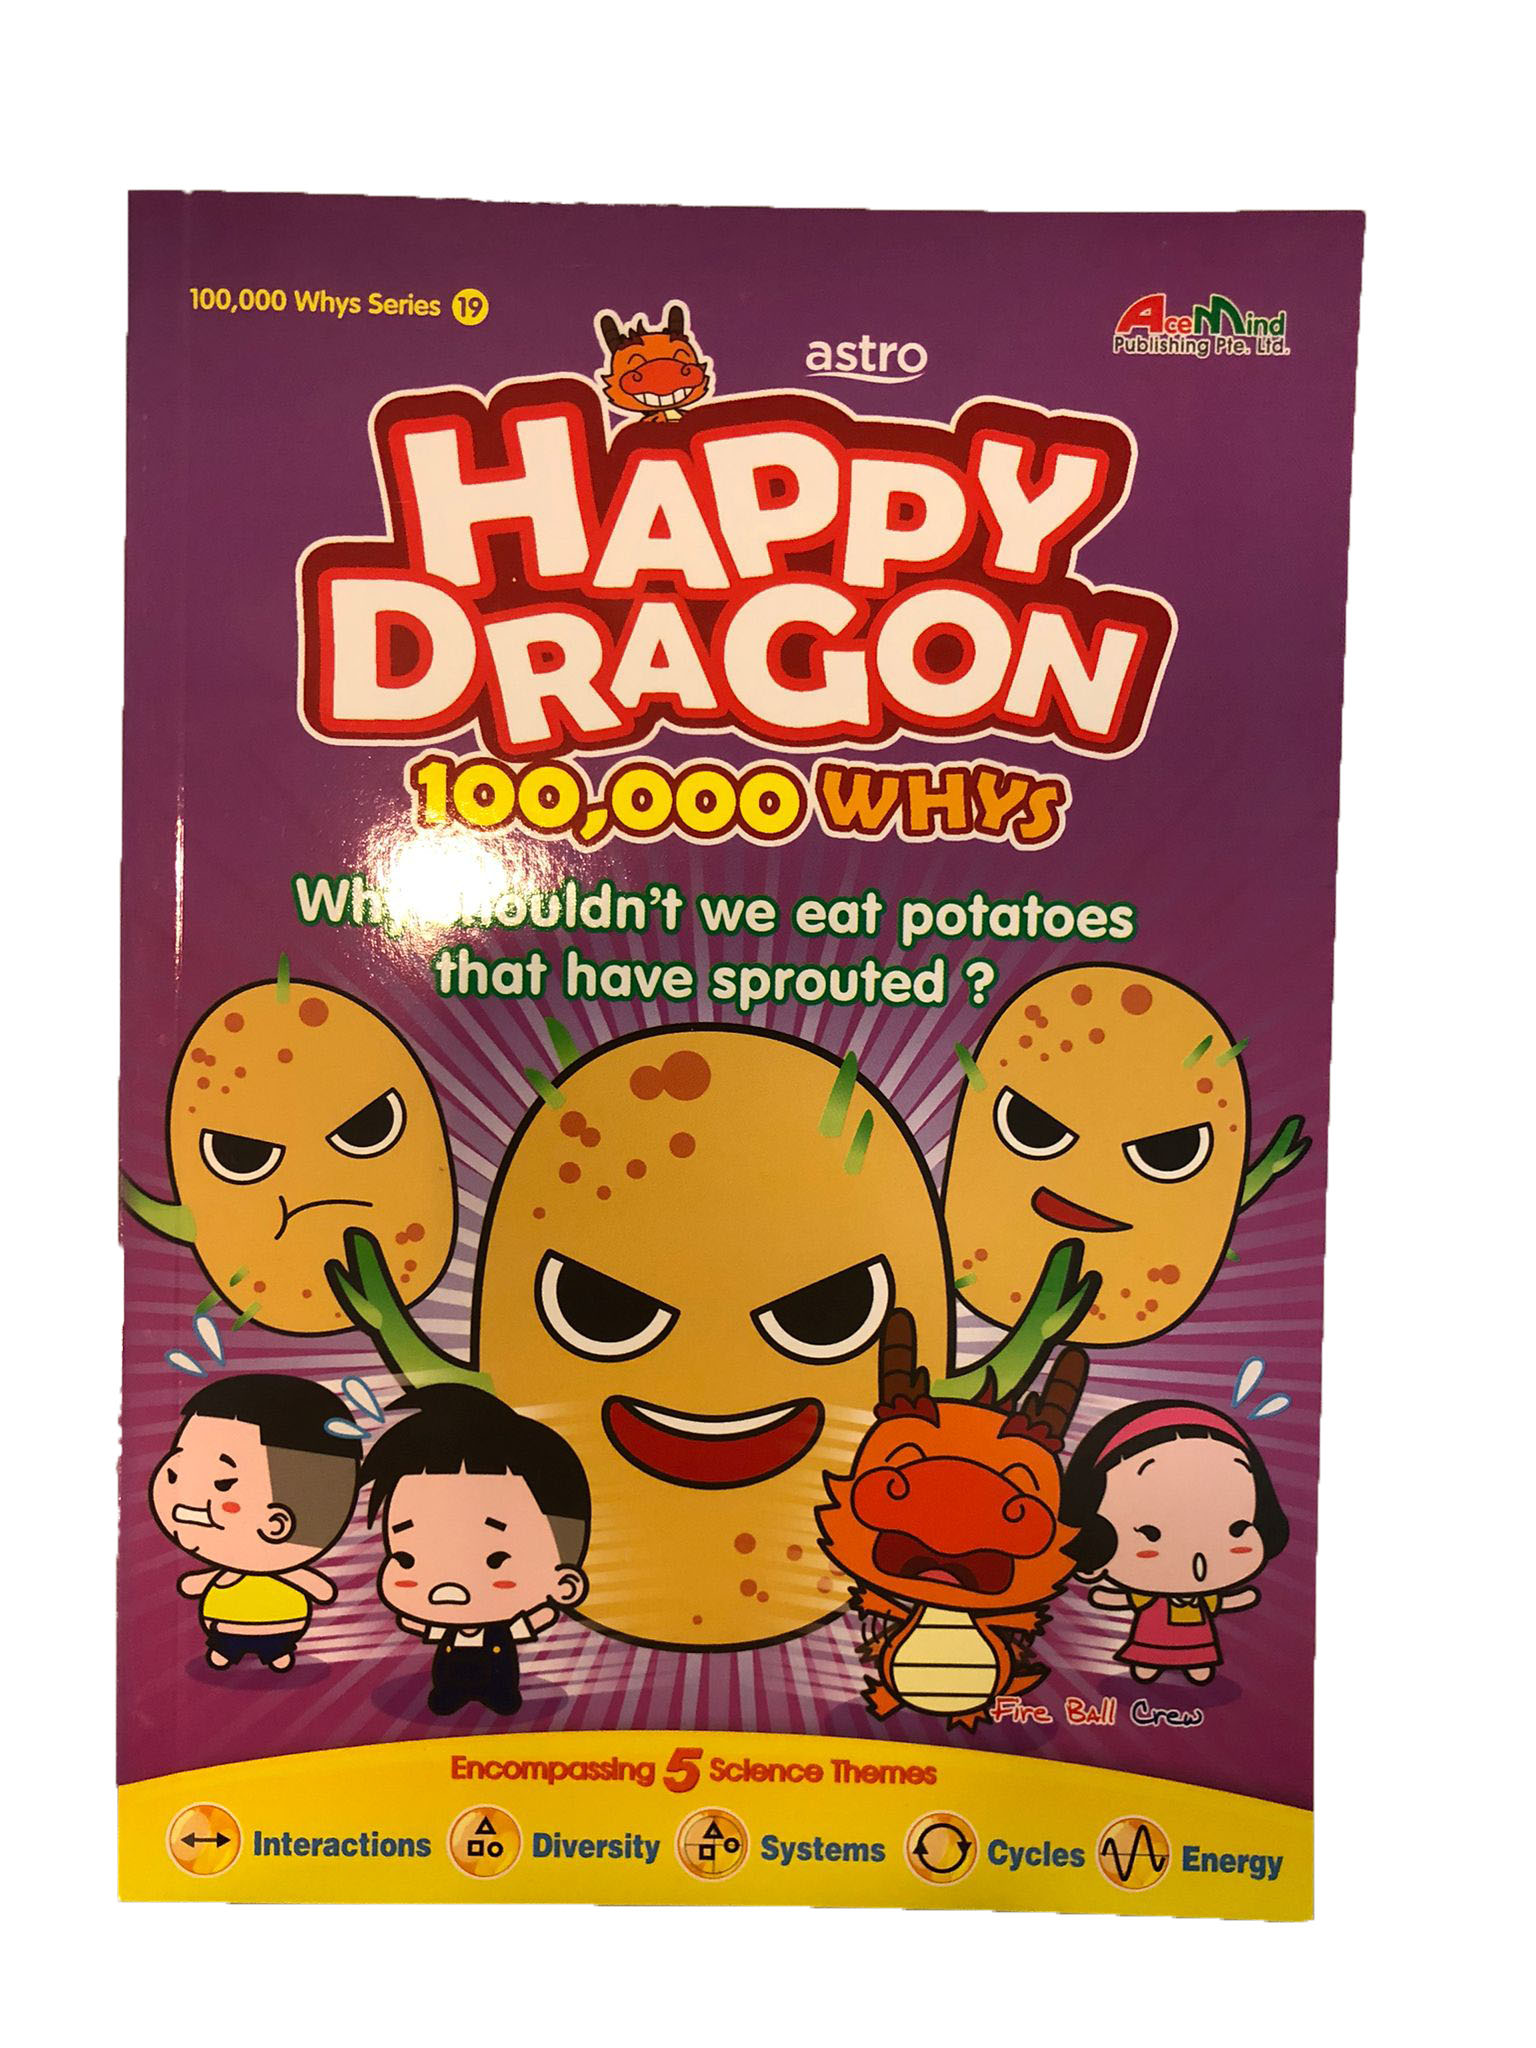 Happy Dragon #19 Why shouldnt we eat poatoes that have sprouted?